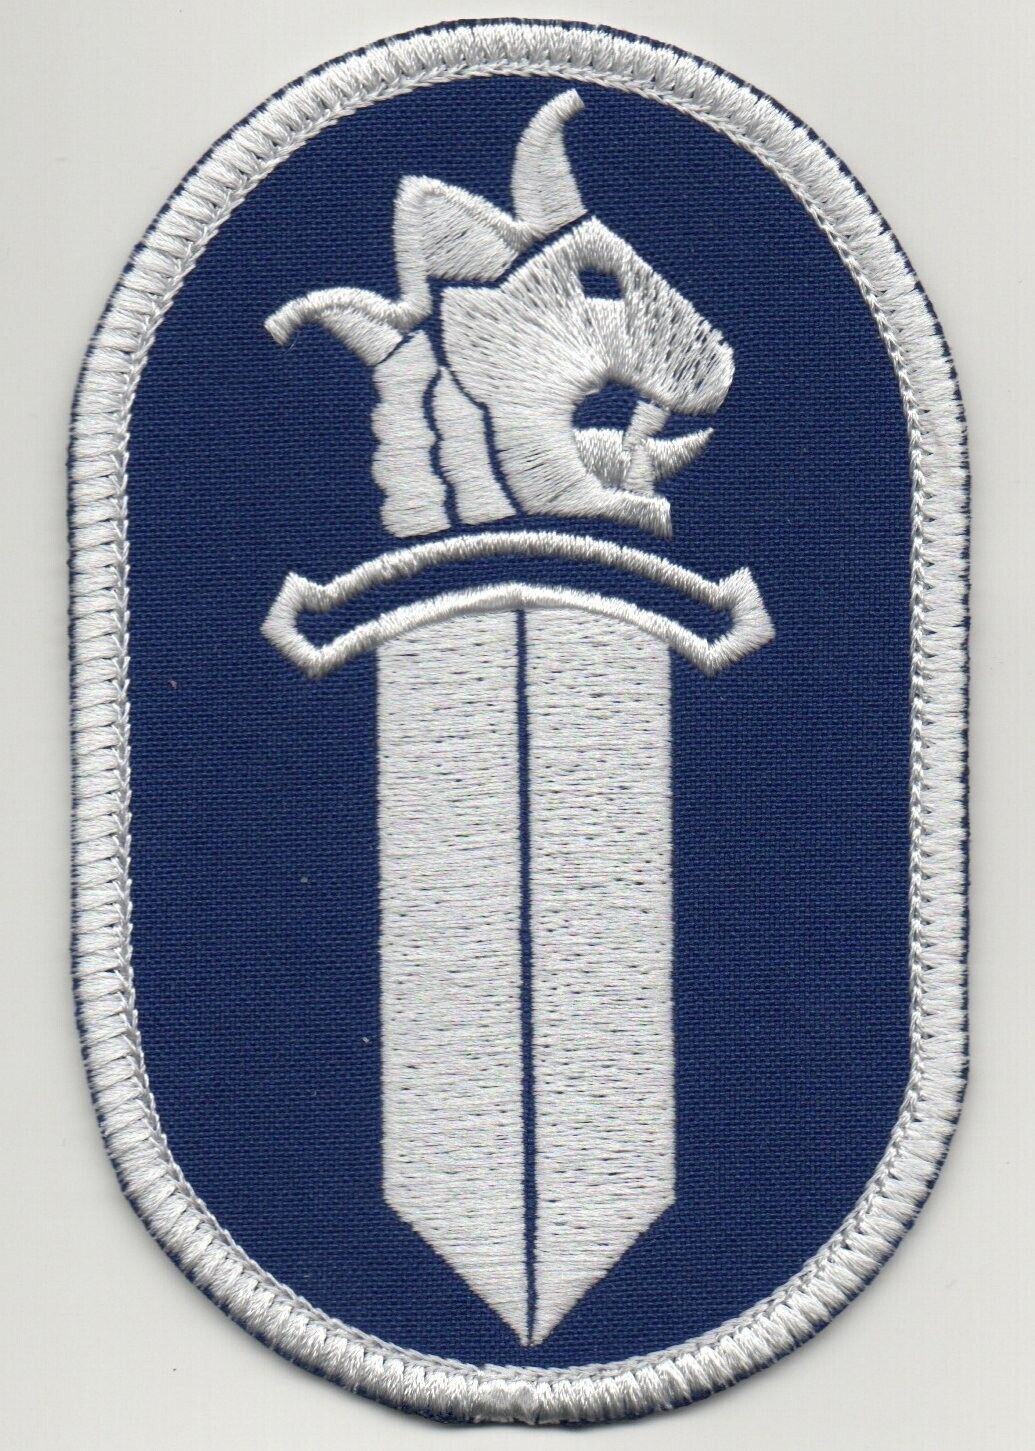 FINLAND. SUOMI. POLICE PATCH. NEW.